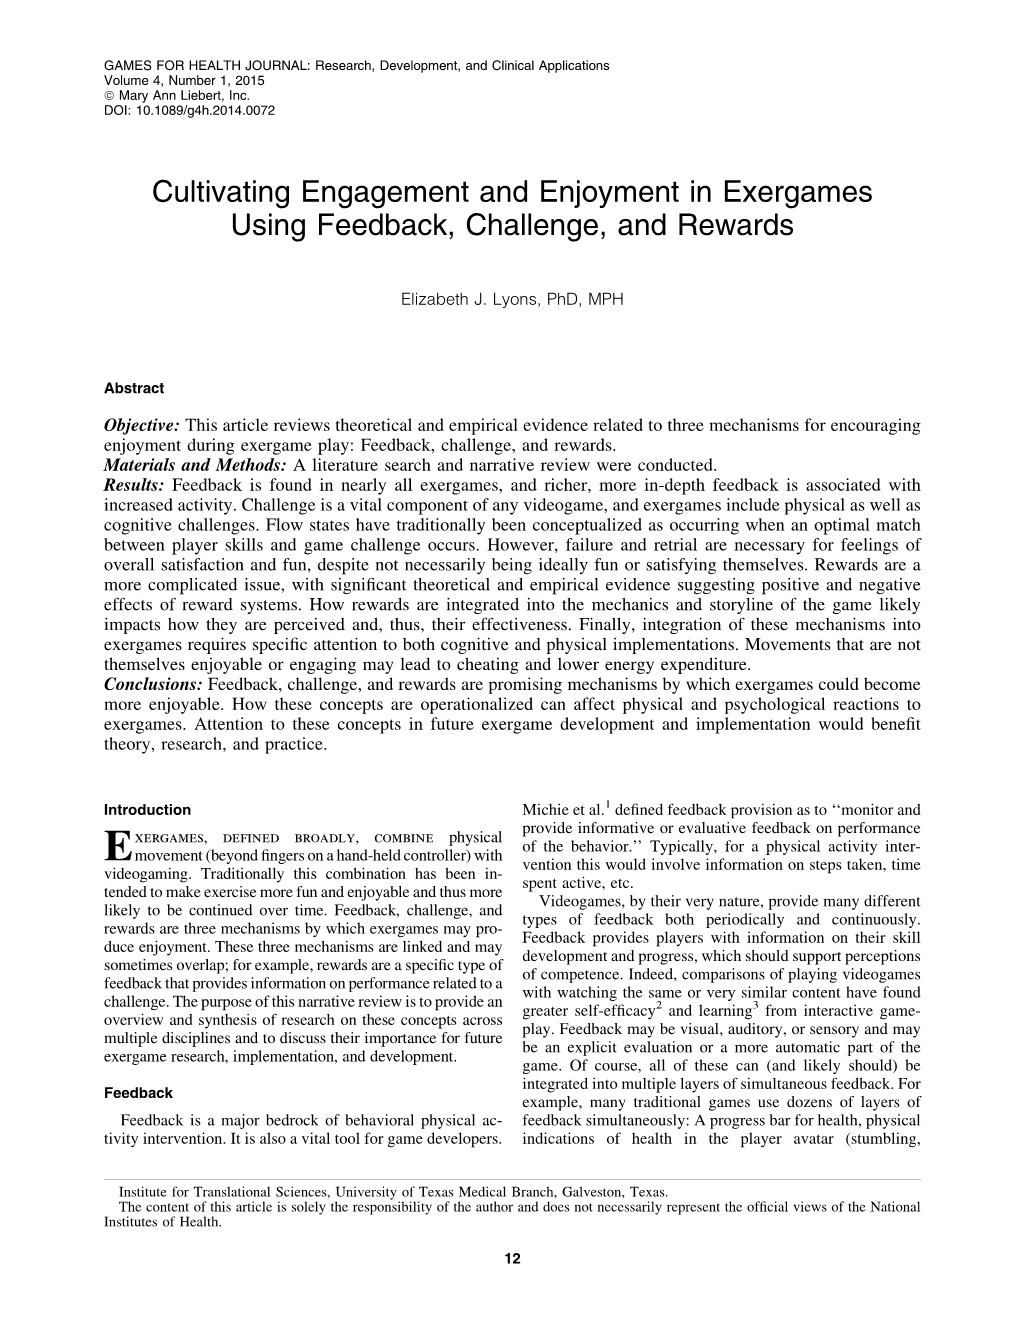 Cultivating Engagement and Enjoyment in Exergames Using Feedback, Challenge, and Rewards